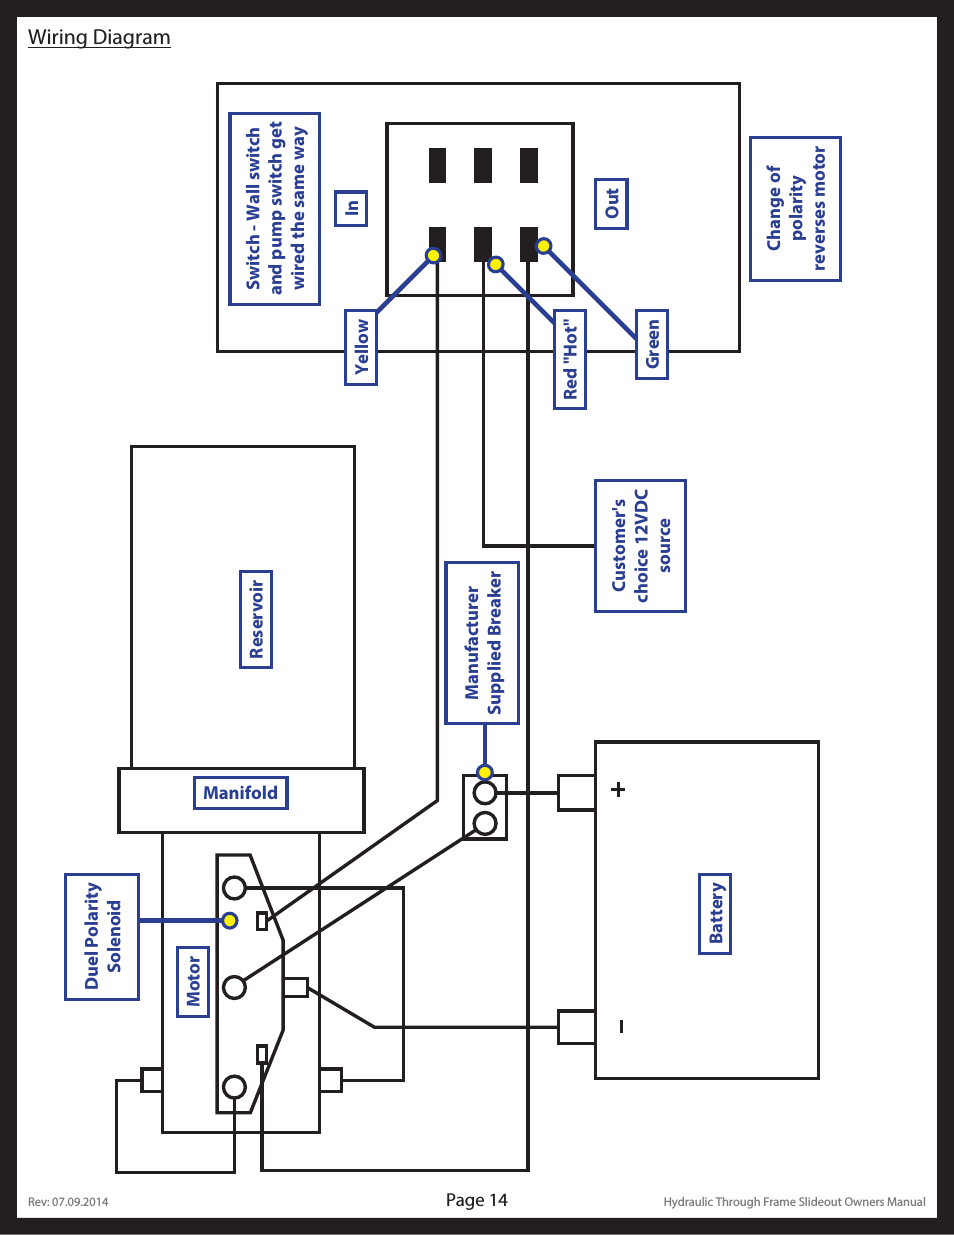 Rv Slide Out Wiring Diagram | Wiring Library - Rv Slide Out Switch Wiring Diagram